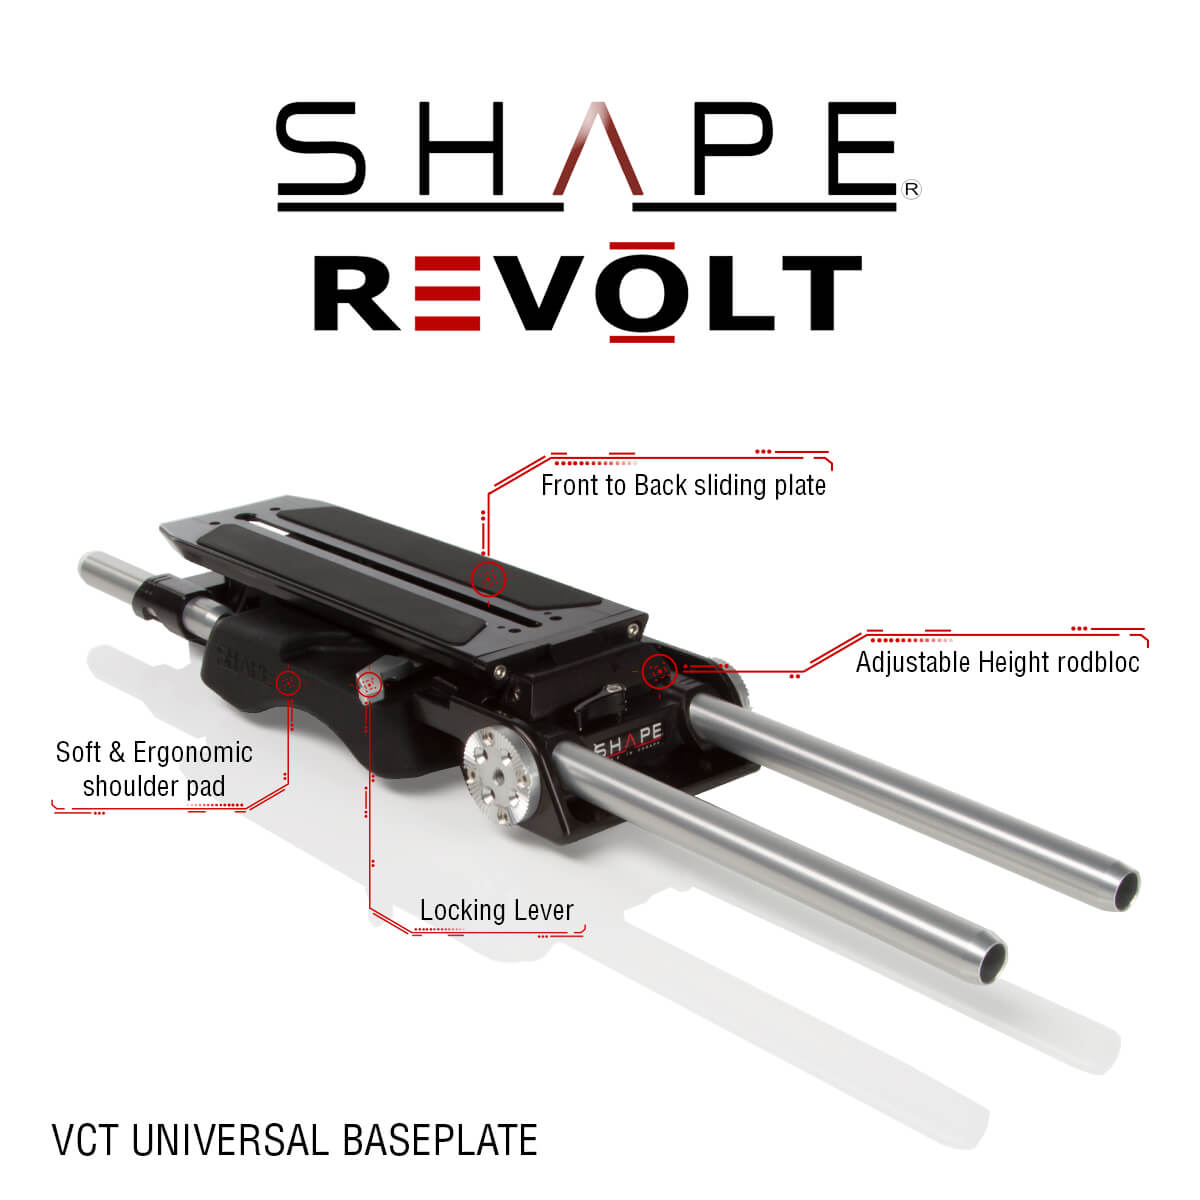 SHAPE VCT Universal Baseplate with Wooden Handles - SHAPE wlb